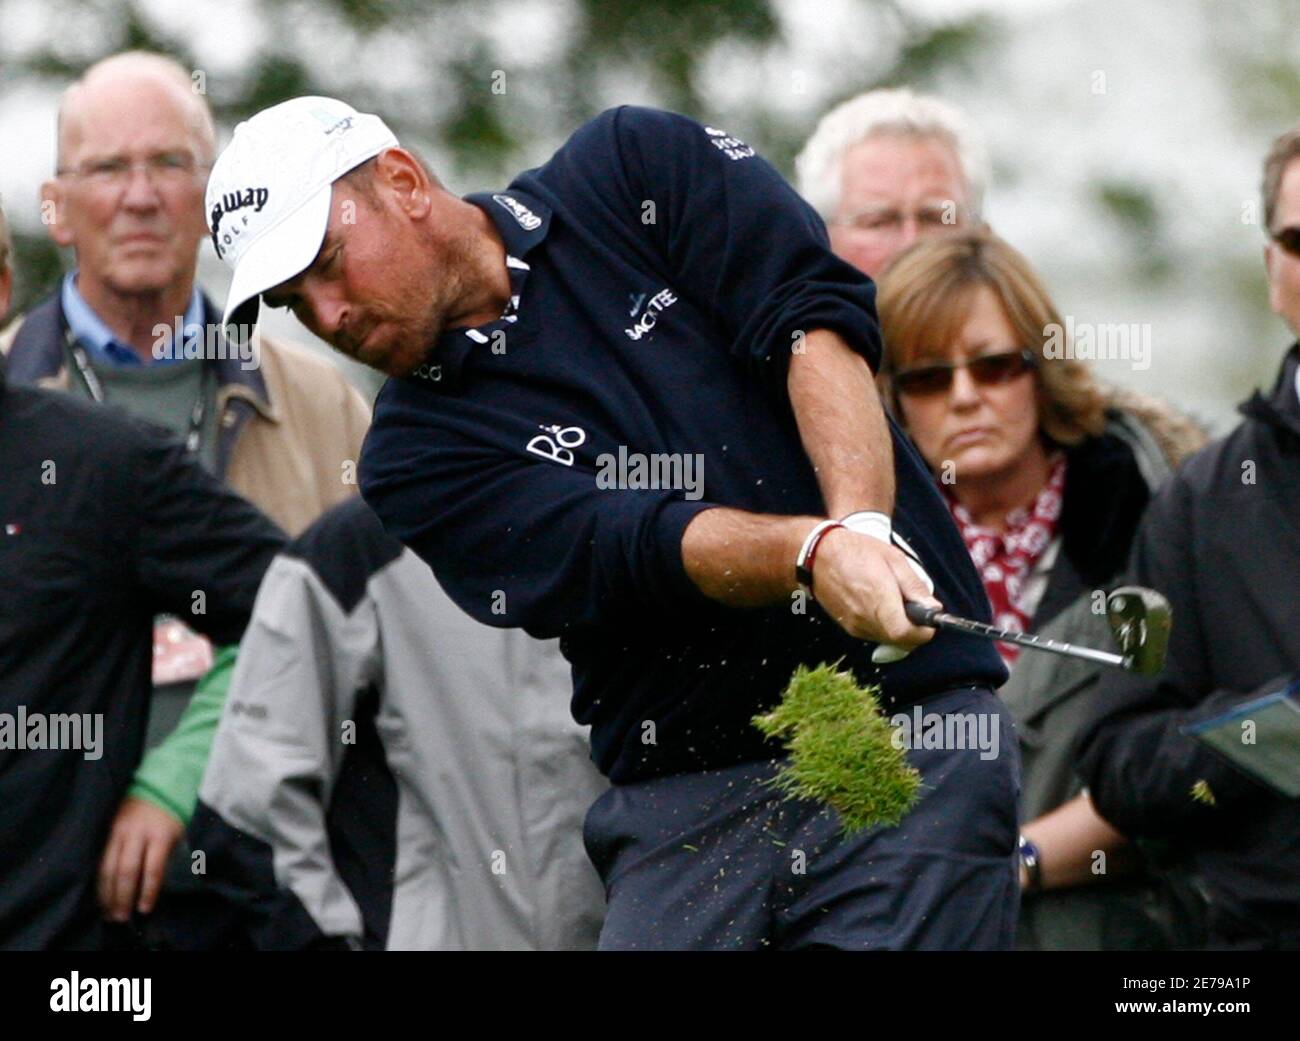 Denmark's Thomas Bjorn plays his second shot at the ninth hole during his second round of the Scottish Open golf tournament at Loch Lommond near Glasgow, Scotland, July 11, 2008. REUTERS/David Moir (BRITAIN) Stock Photo